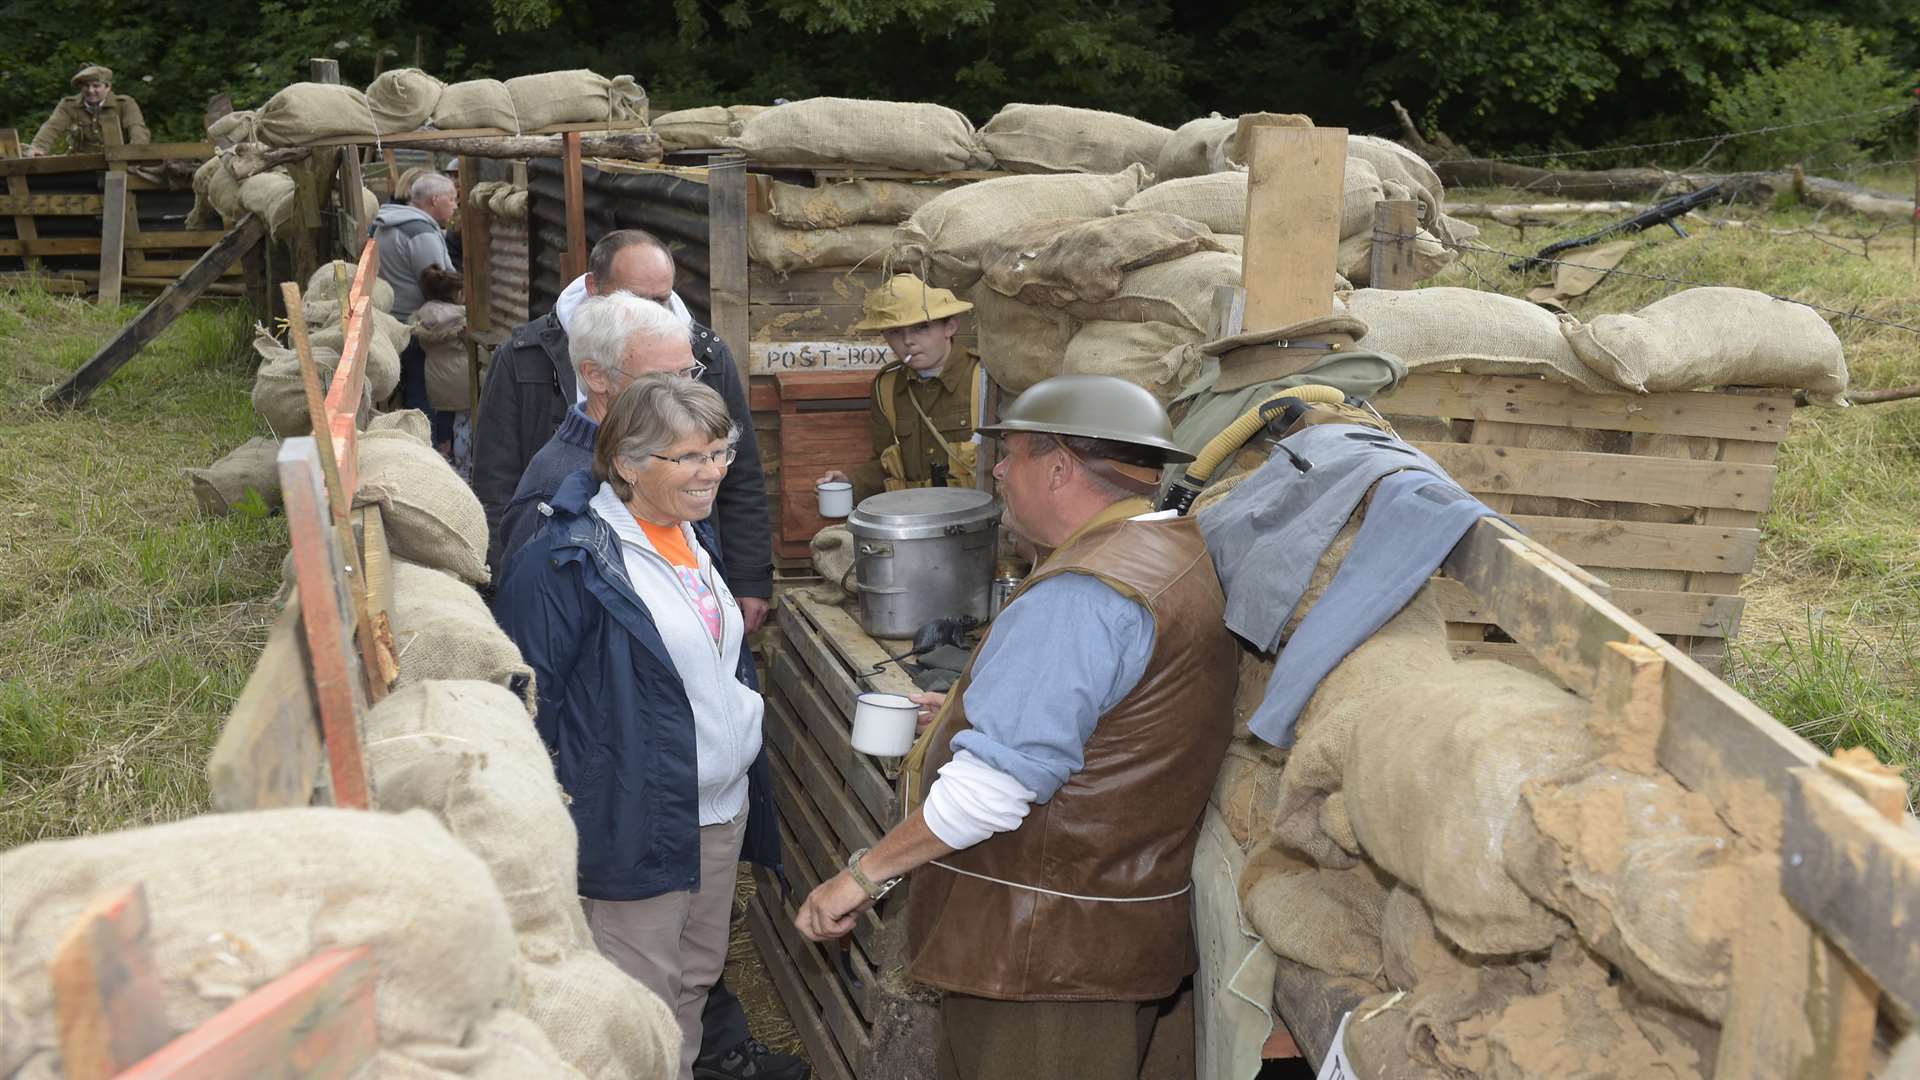 People discover what life was like in the trenches